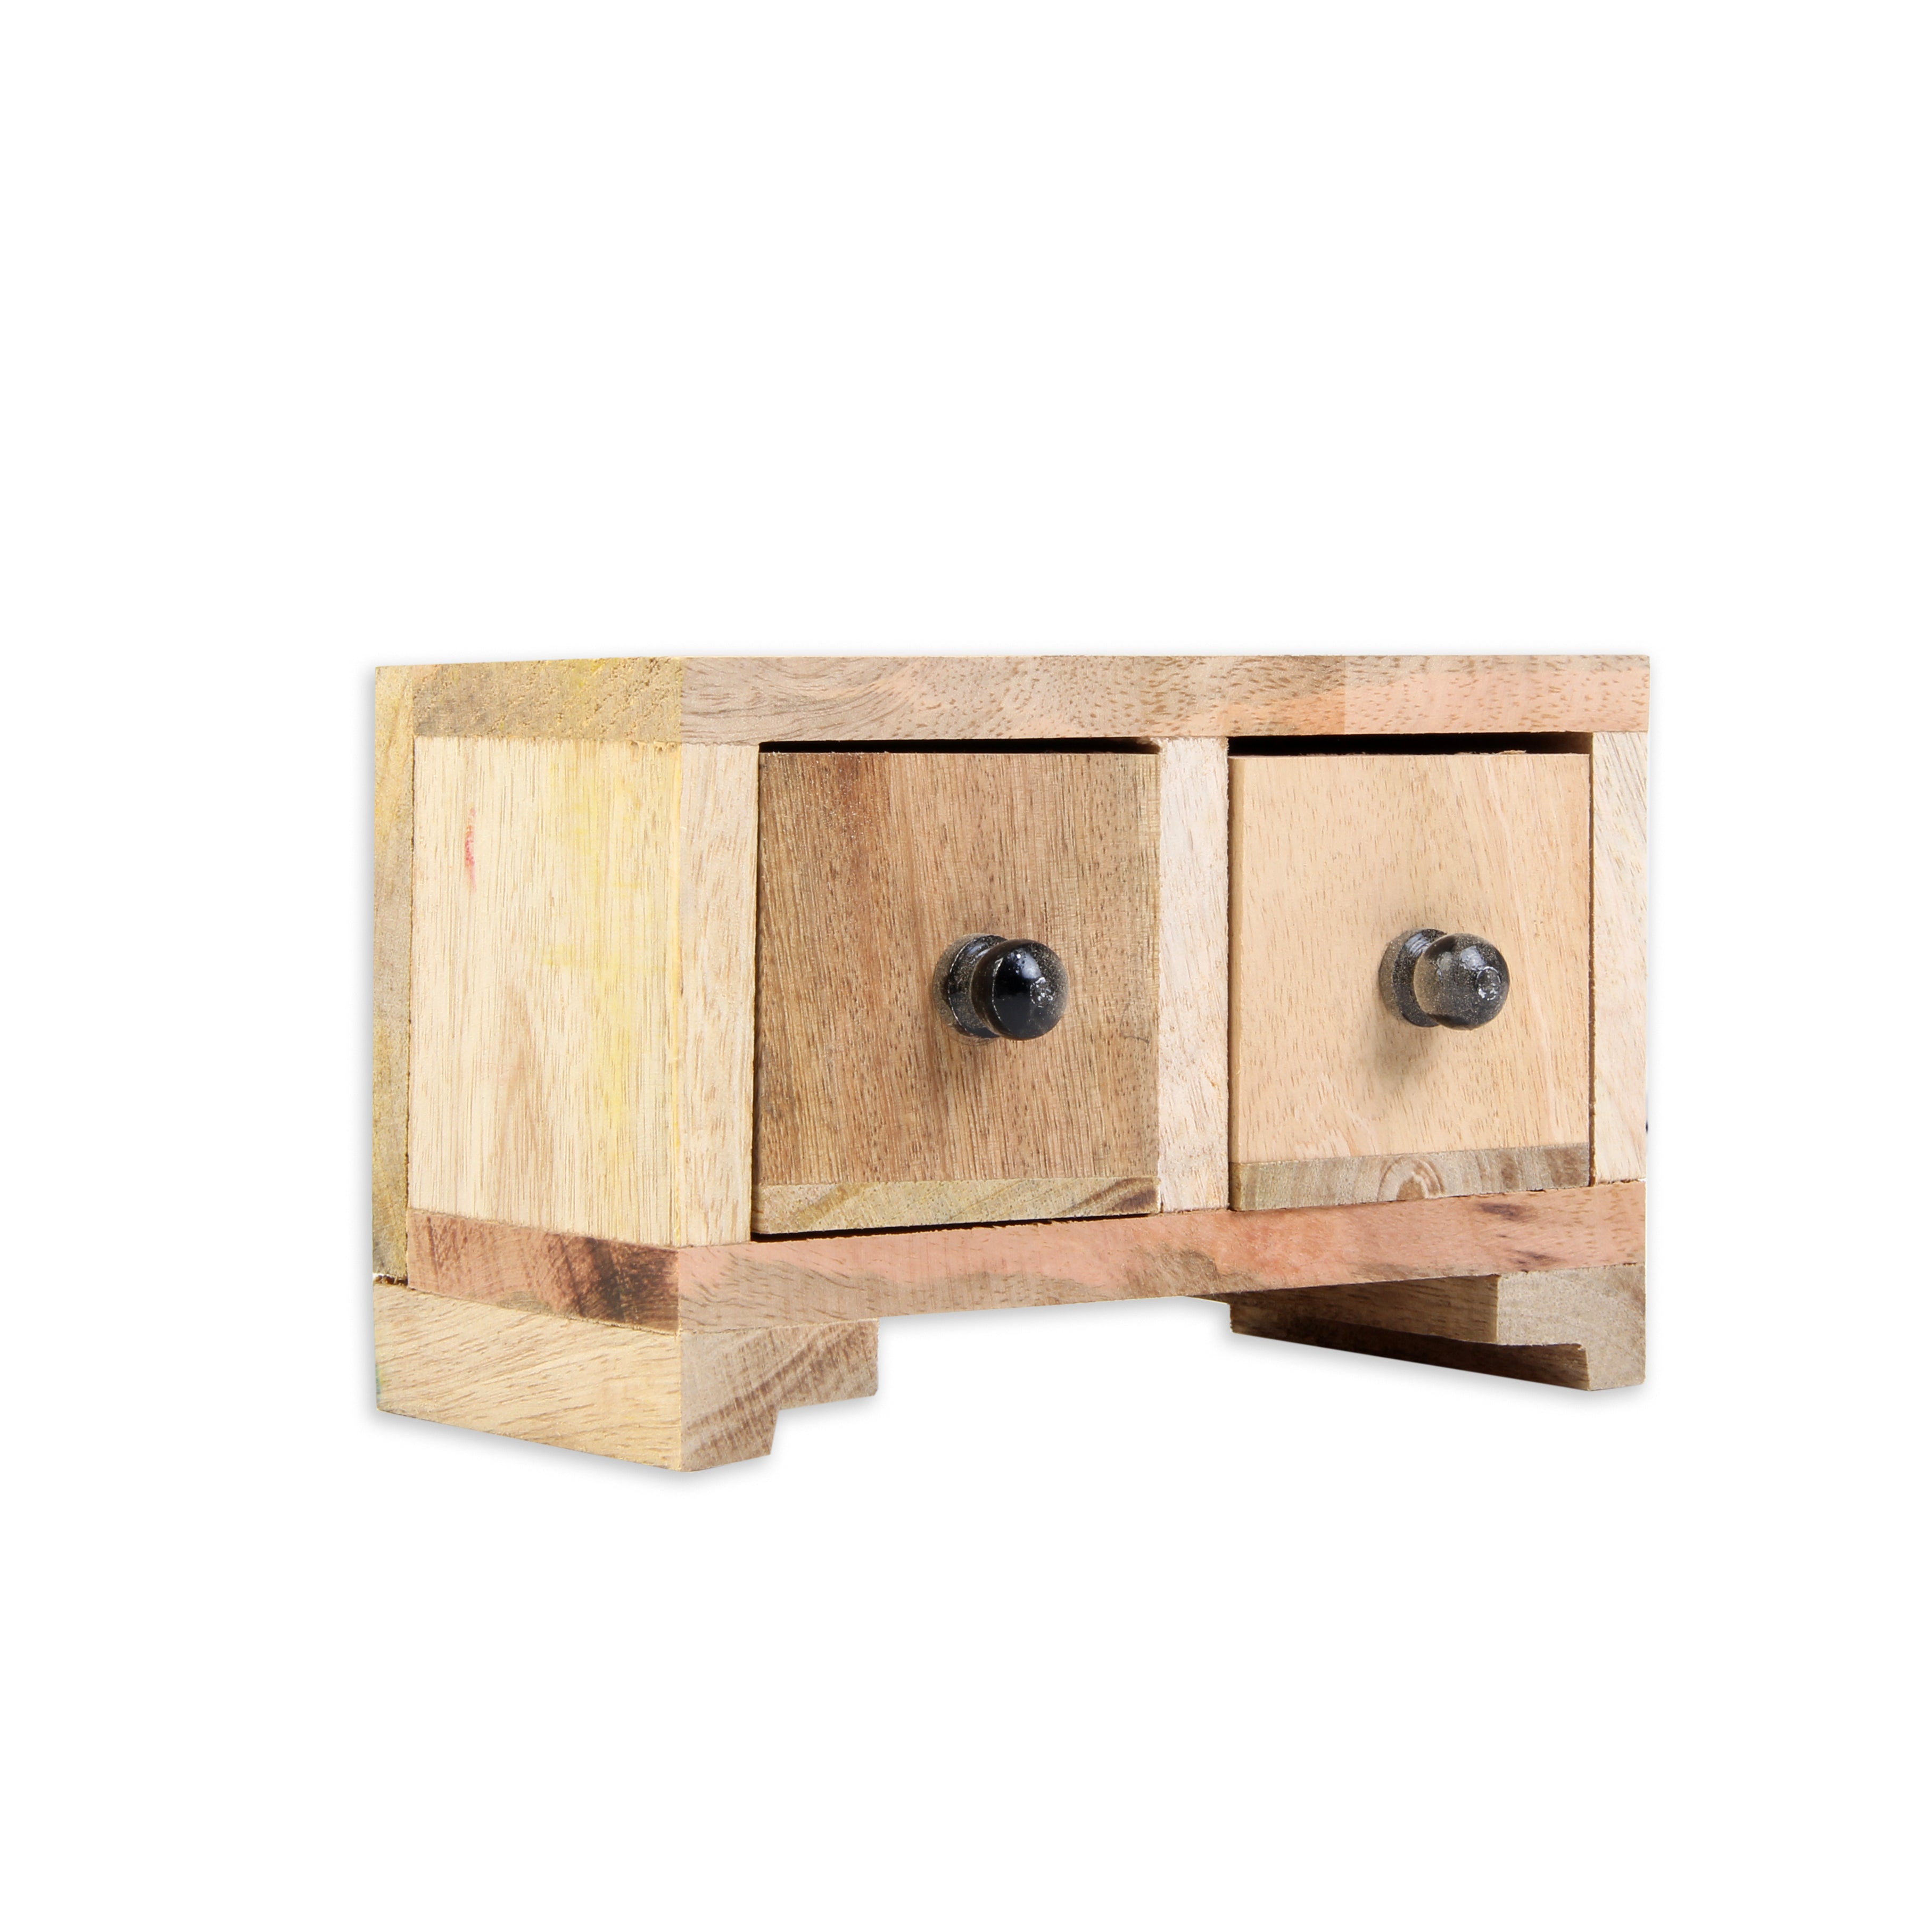 Wooden Double Drawer Organizer (2 Compartments) 3 X 3.5 X 6inch 1pc